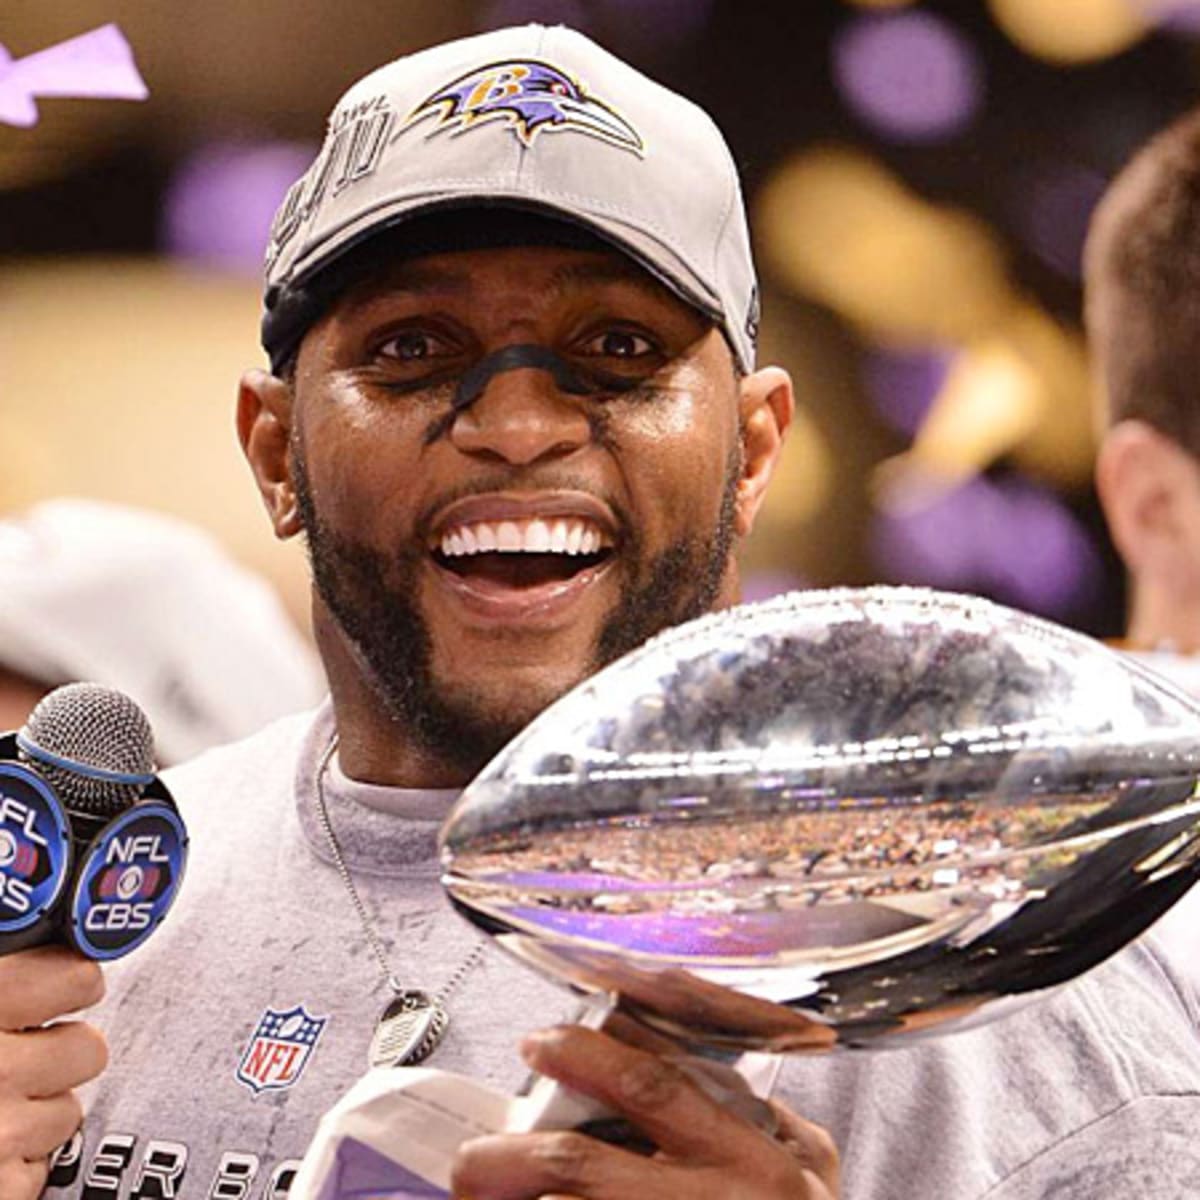 Super Bowl 2013: Ray Lewis more focused on 49ers than retirement - CBS News